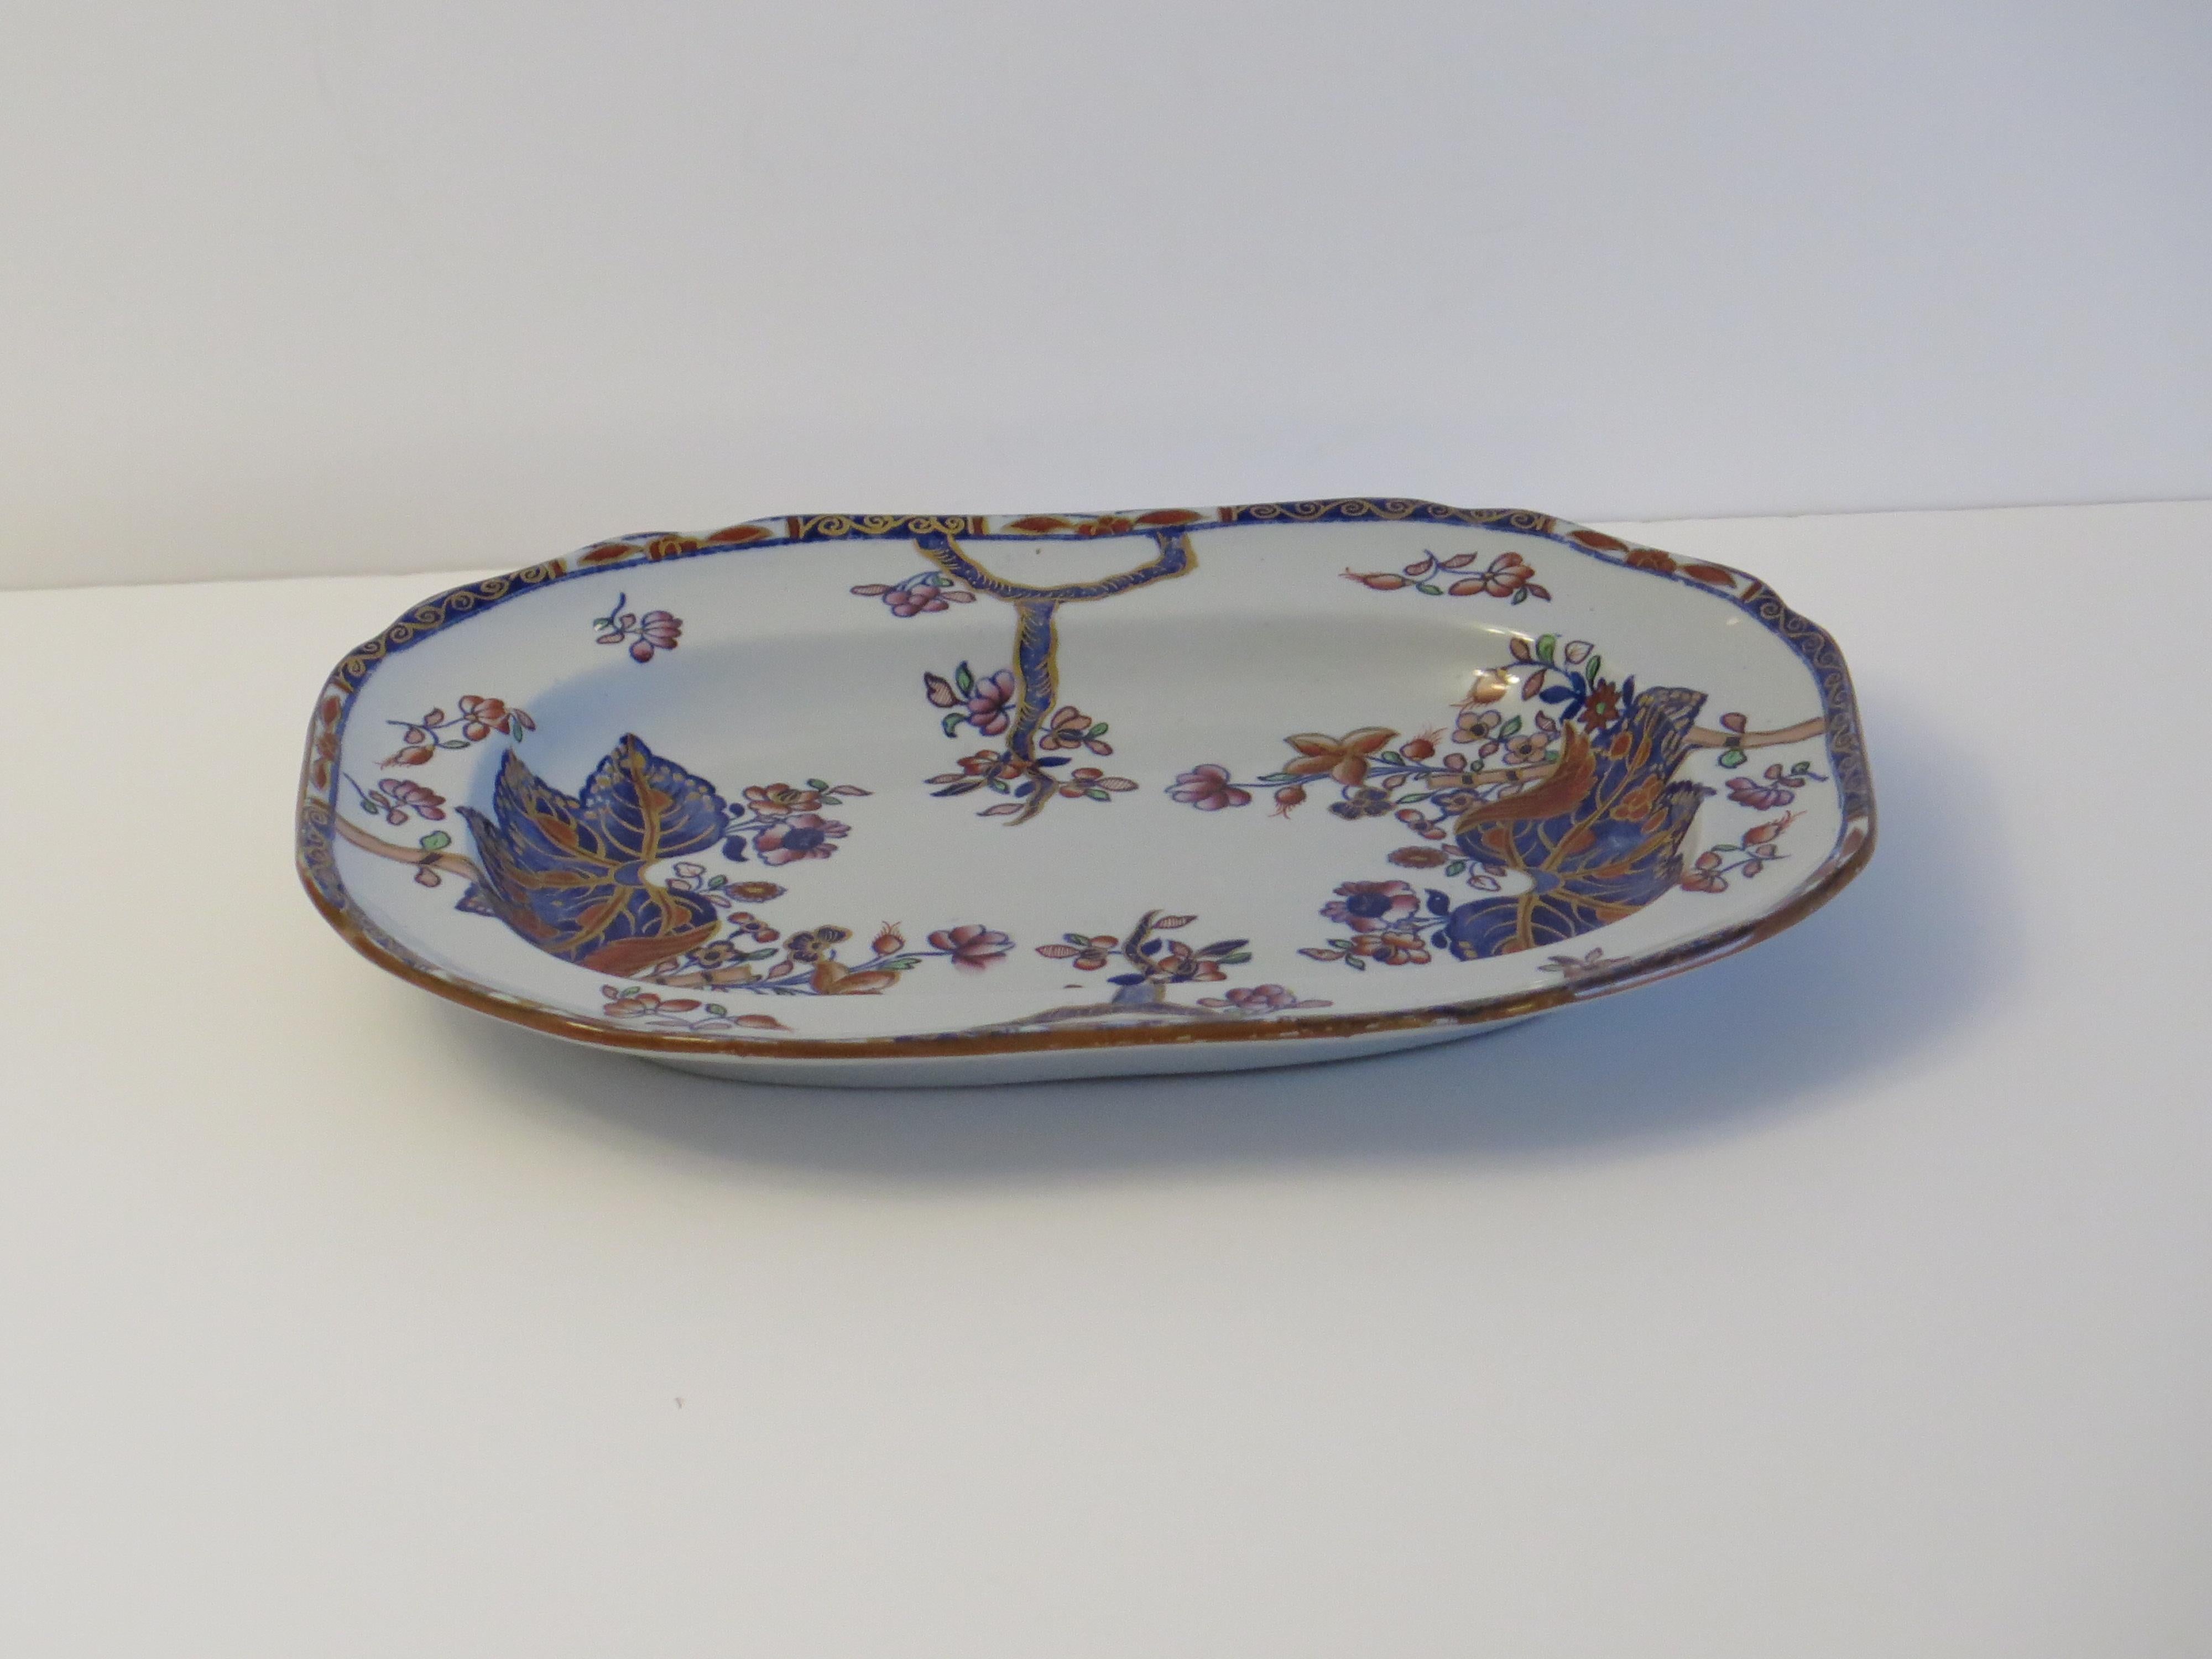 English Copeland Stone China Dish or Platter in Tobacco Leaf Pattern No 2061, Mid 19th C